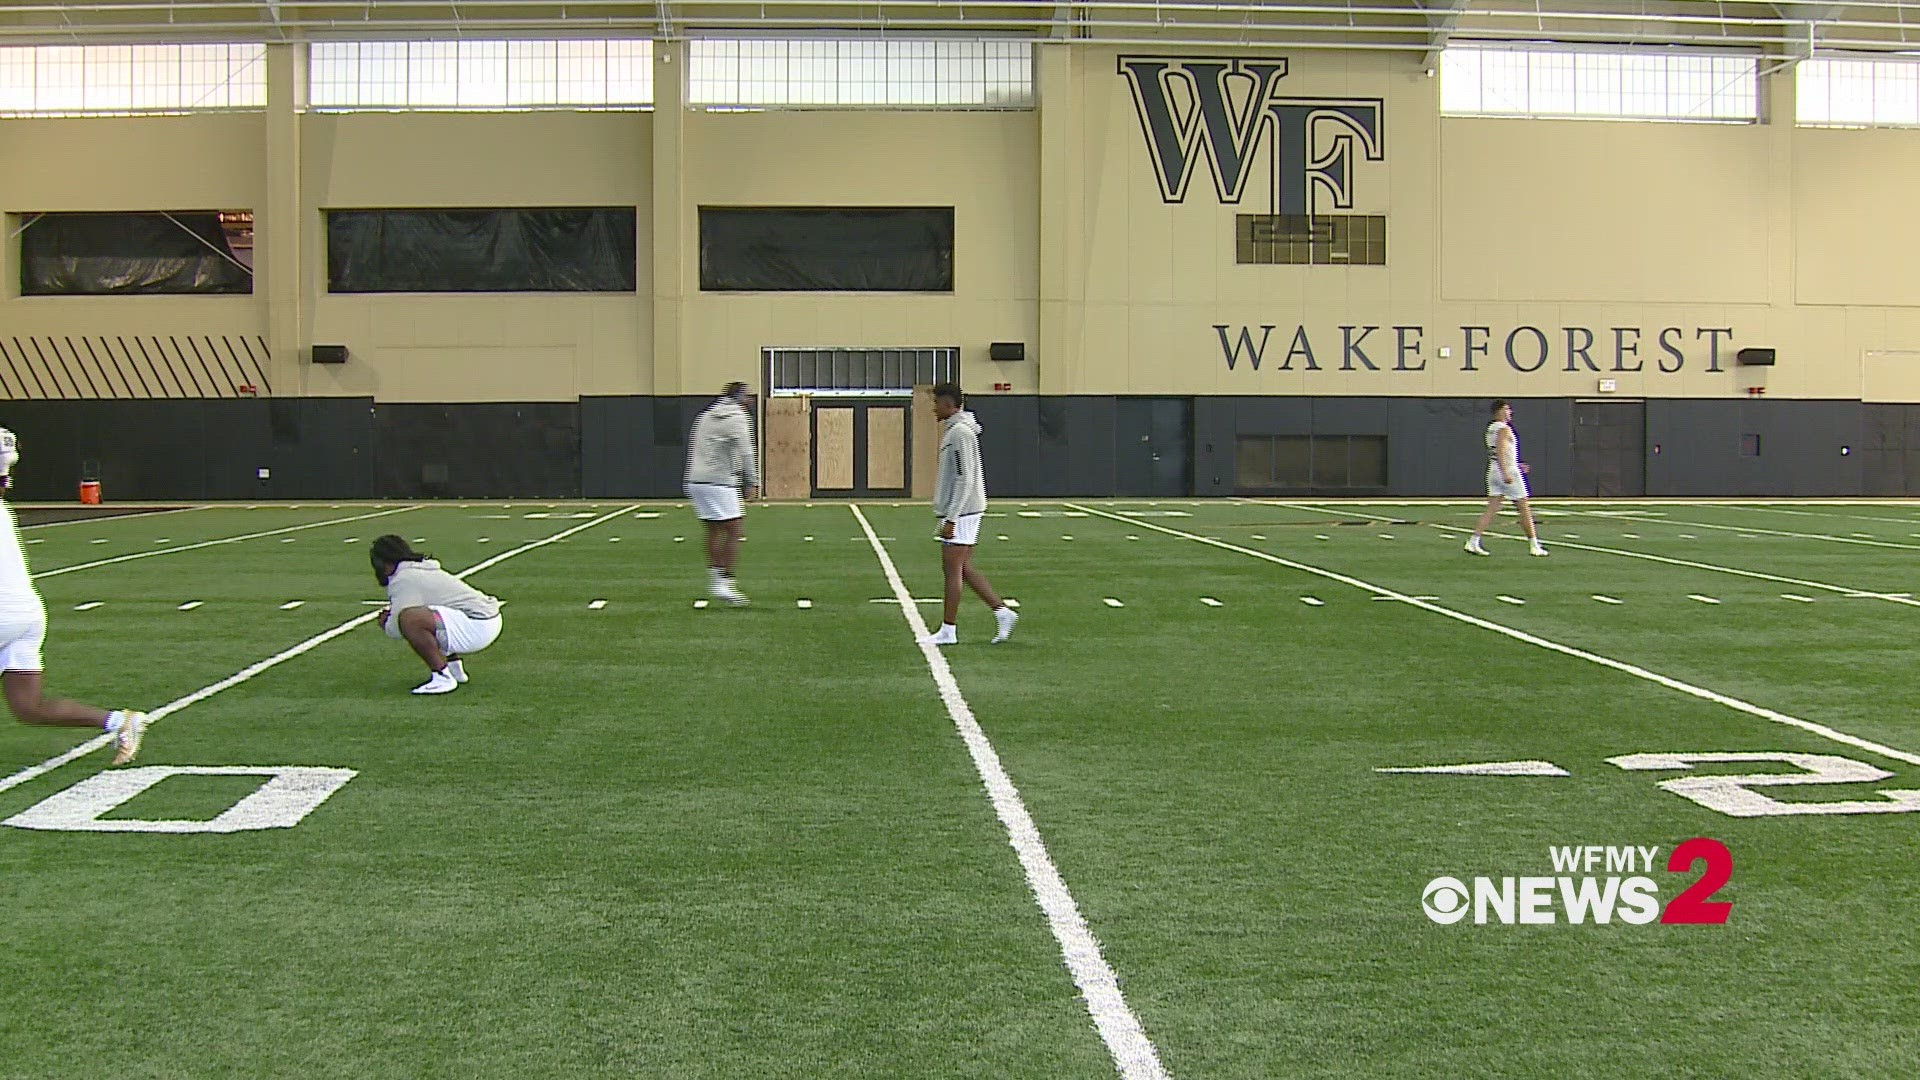 28 of the 32 NFL teams had representatives in Winston-Salem for Wake Forest Pro Day